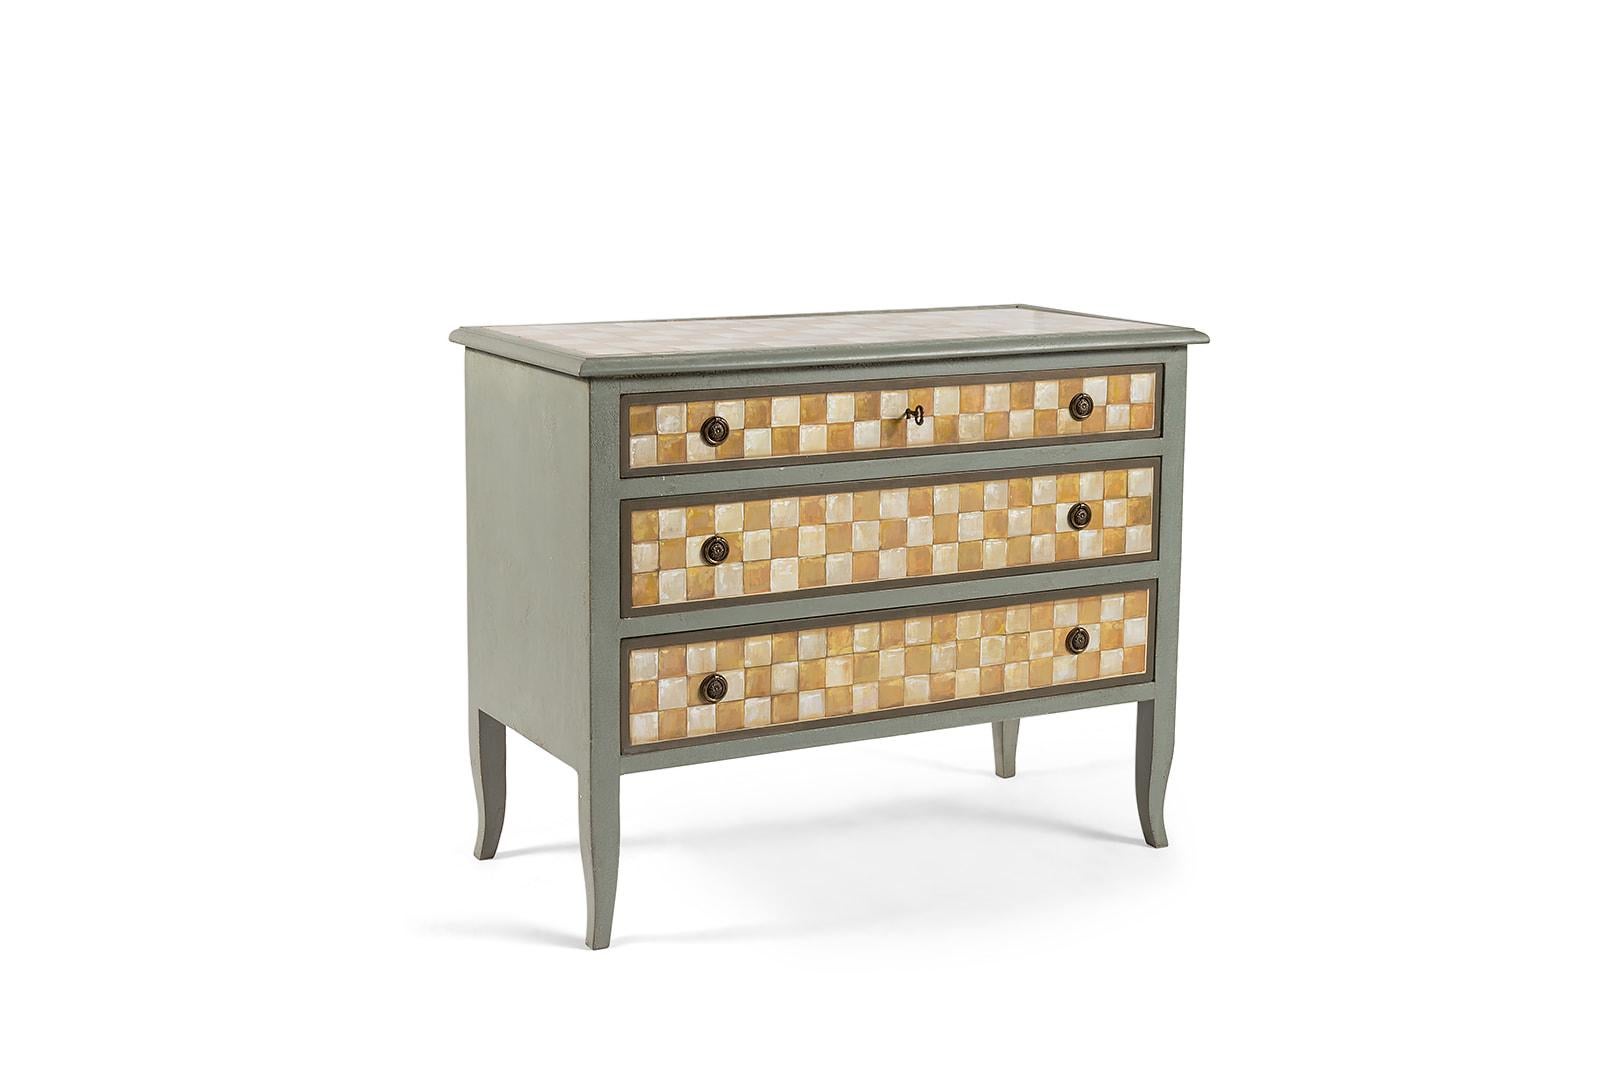 From our Hand-Painted Furniture Collection, we are pleased to introduce you to our Fiesole Chest with our new faux Tiles Decor. 
Italian ceramic tiles date back many centuries and can be found in cathedrals and villas to this day. Struck by their